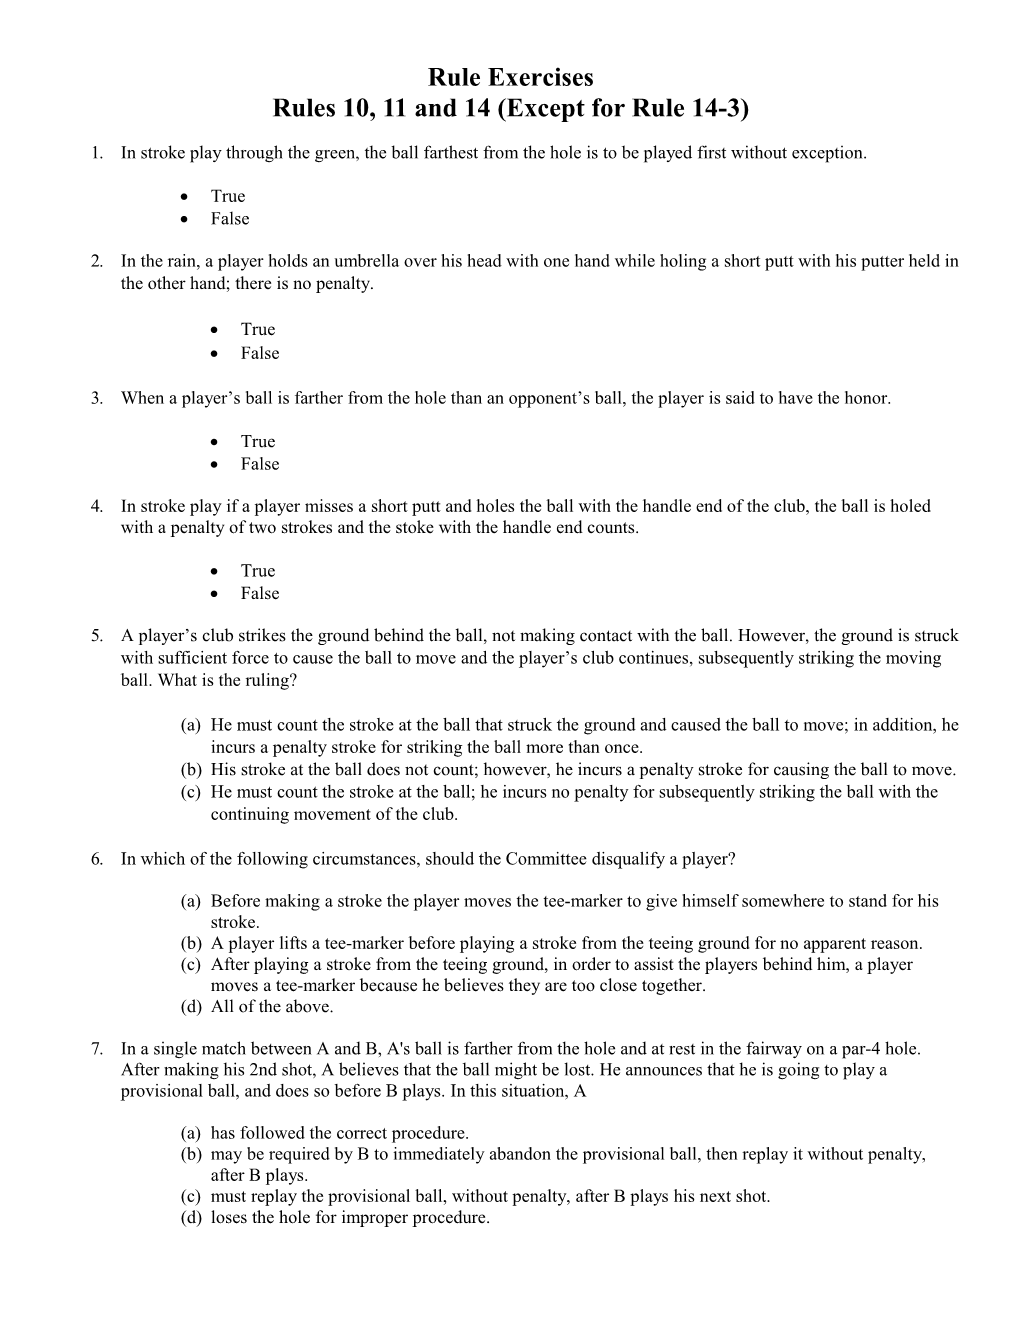 Rule Exercises Rules 10, 11 and 14 (Except for Rule 14-3)